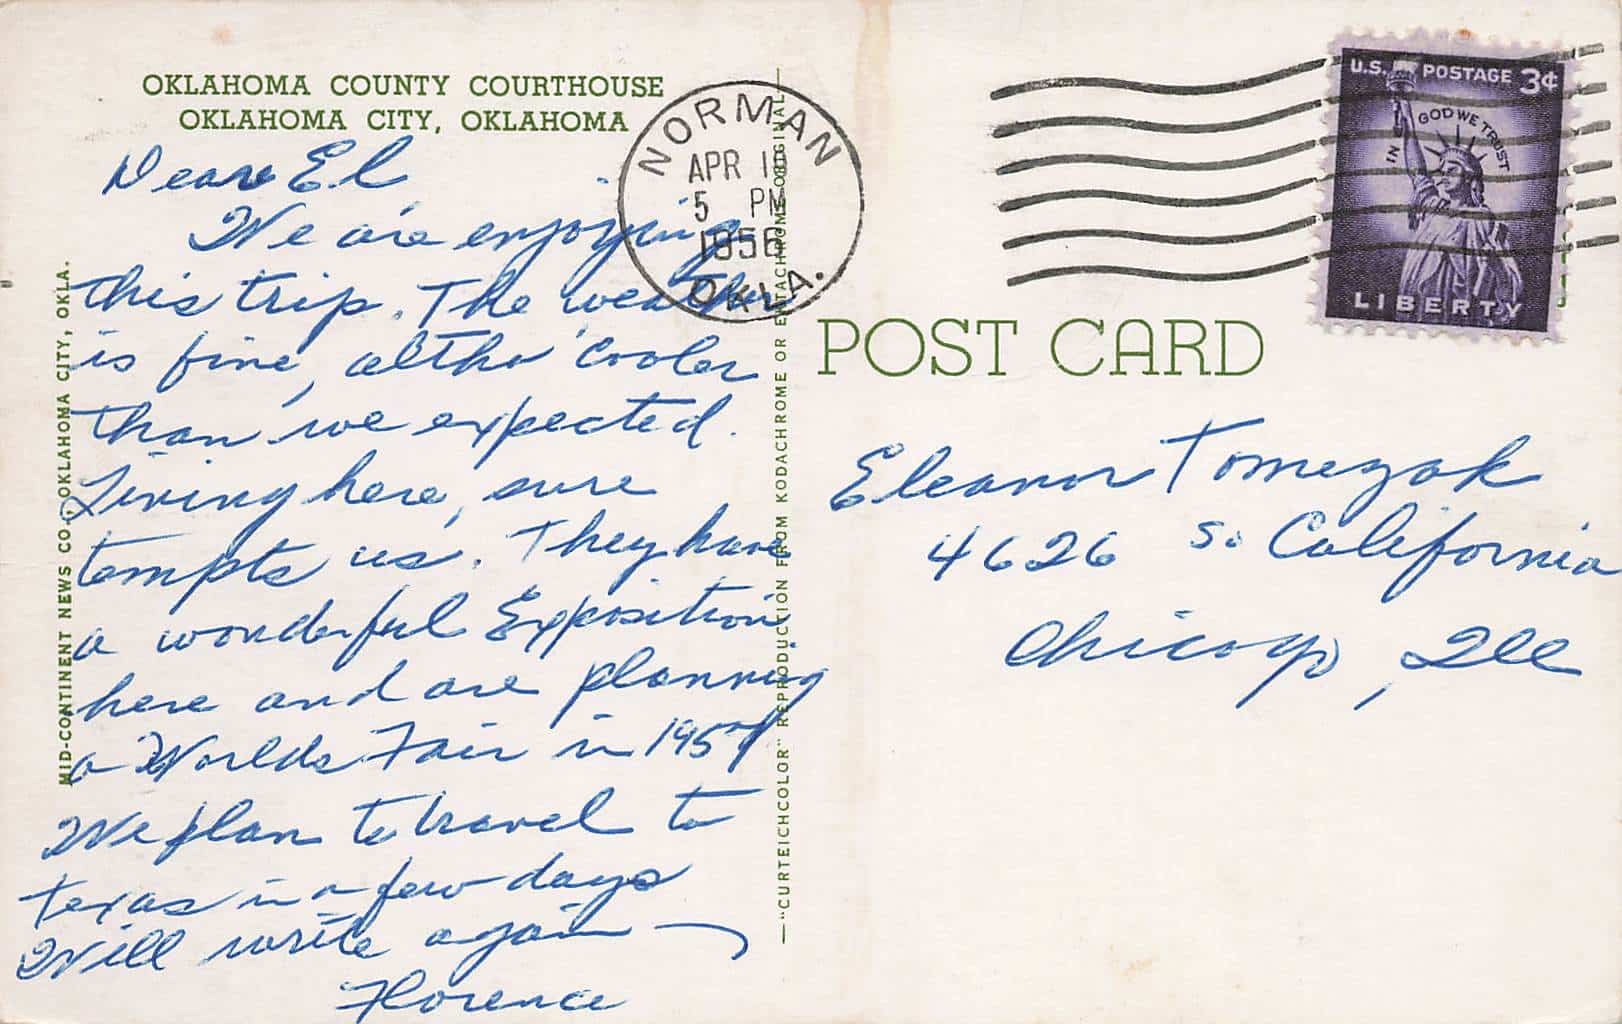 A postcard from the Oklahoma County Courthouse with a handwritten note on it.